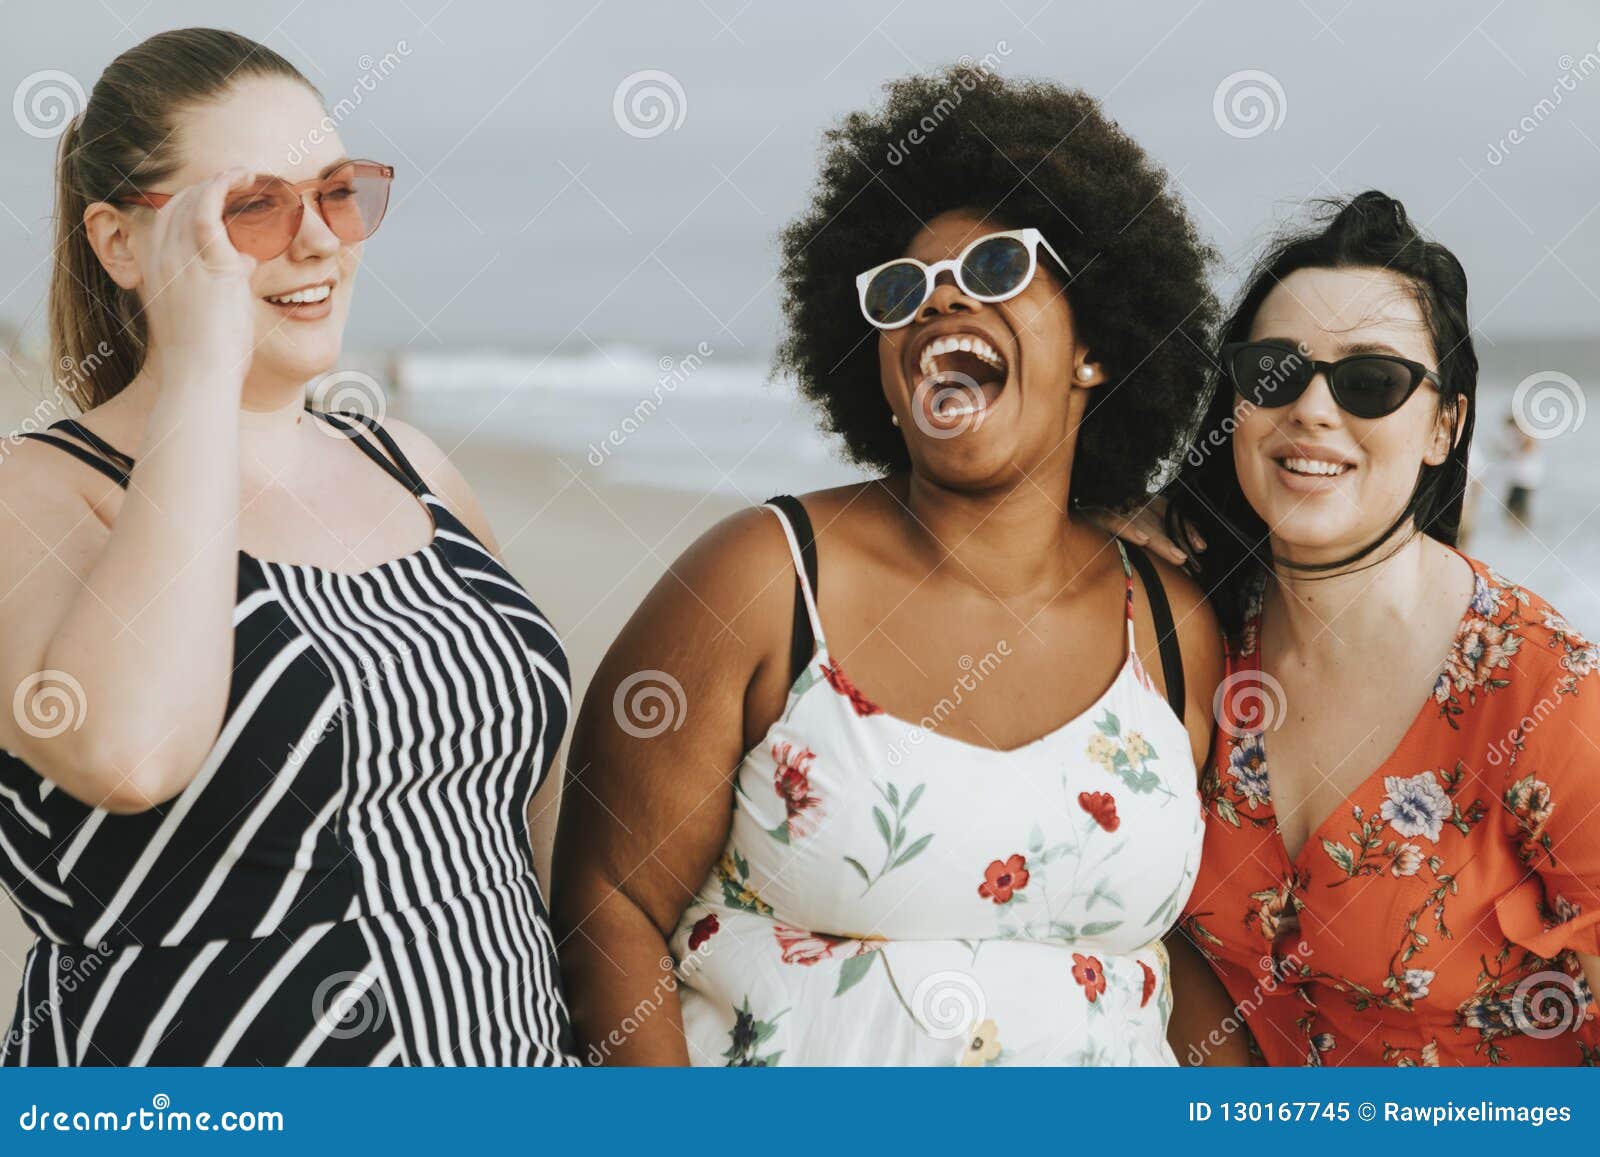 cheerful diverse plus size women at the beach